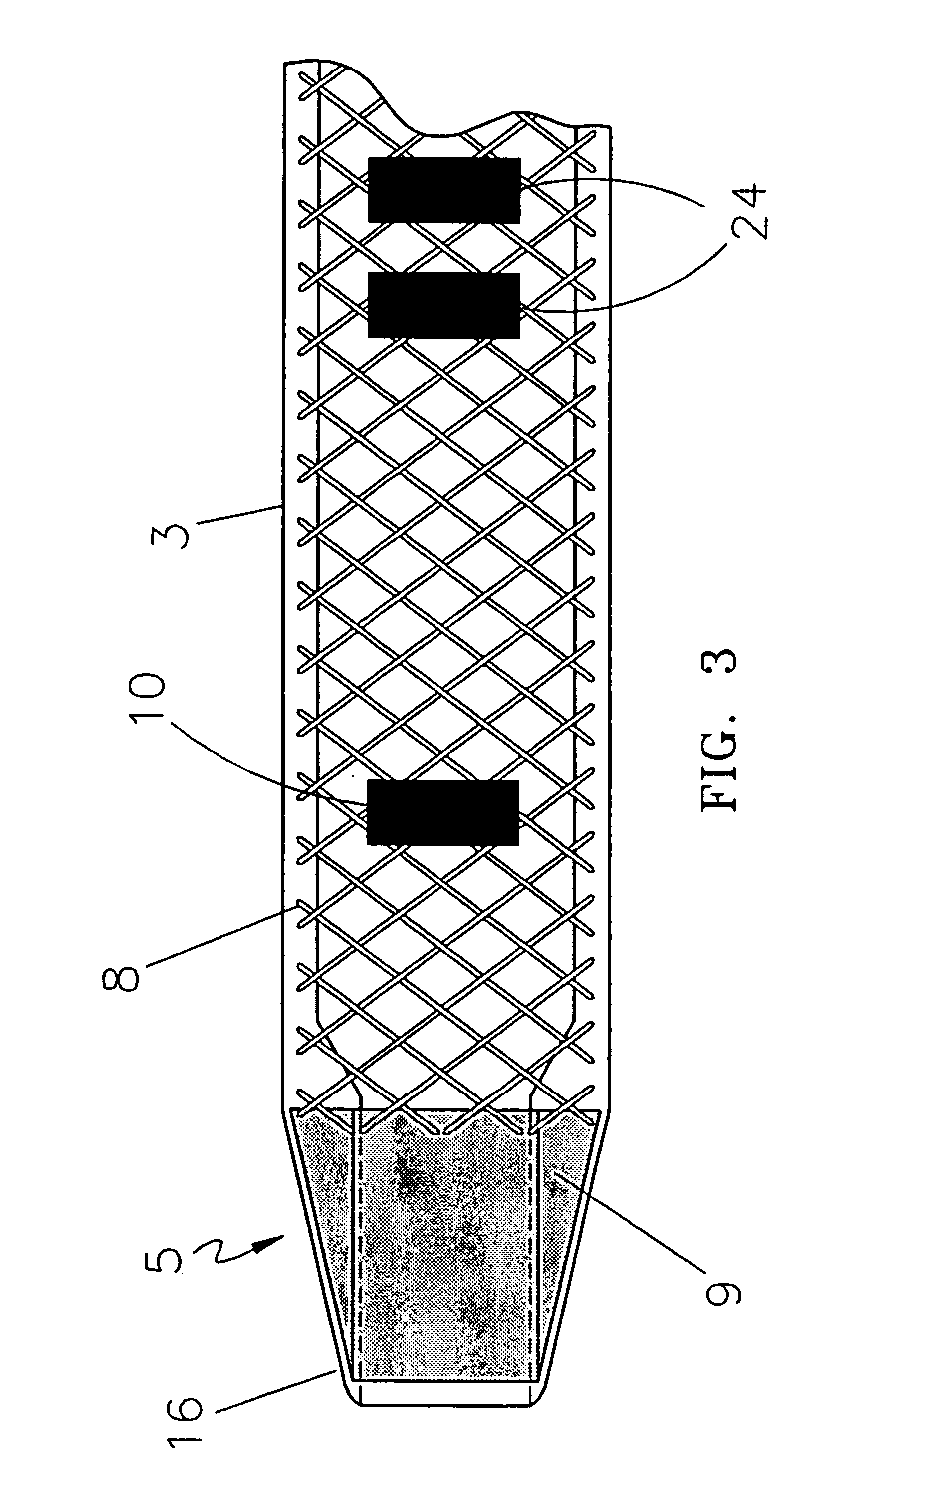 Endovascular treatment apparatus and method